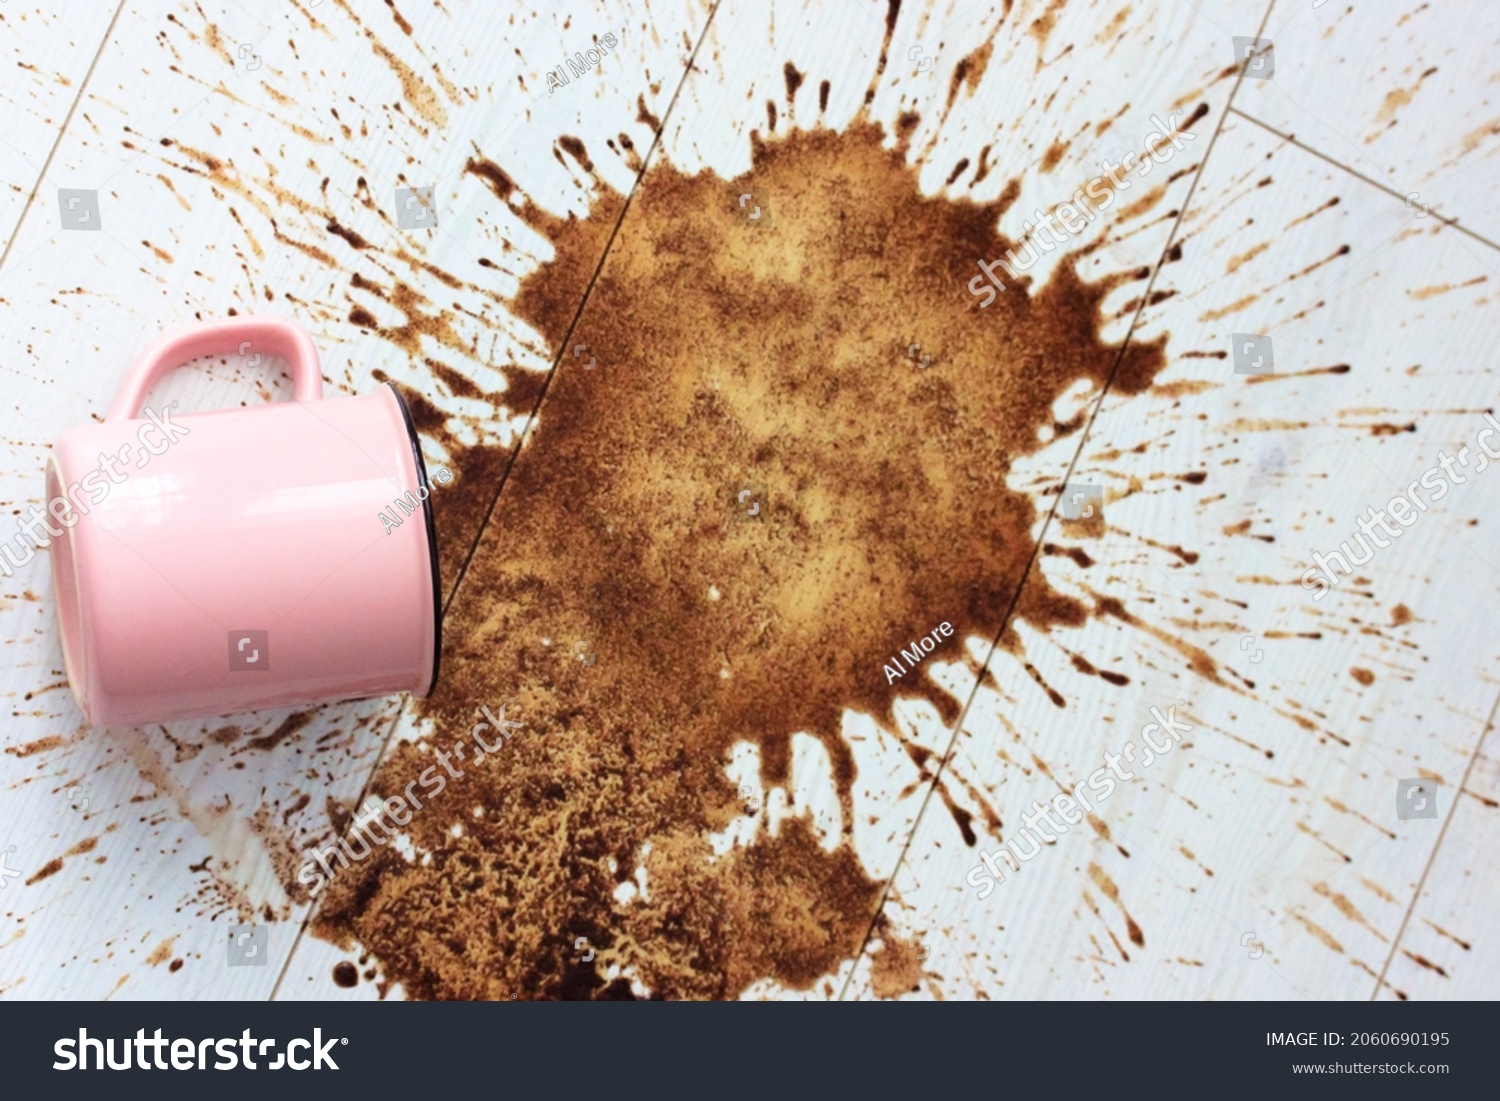 A pink ceramic mug, cup fell on a white wooden parquet floor and left a big stain on it. Spilled coffee in the morning. Lots of hot coffee drink brown splashes flying in different directions flatly.  #2060690195